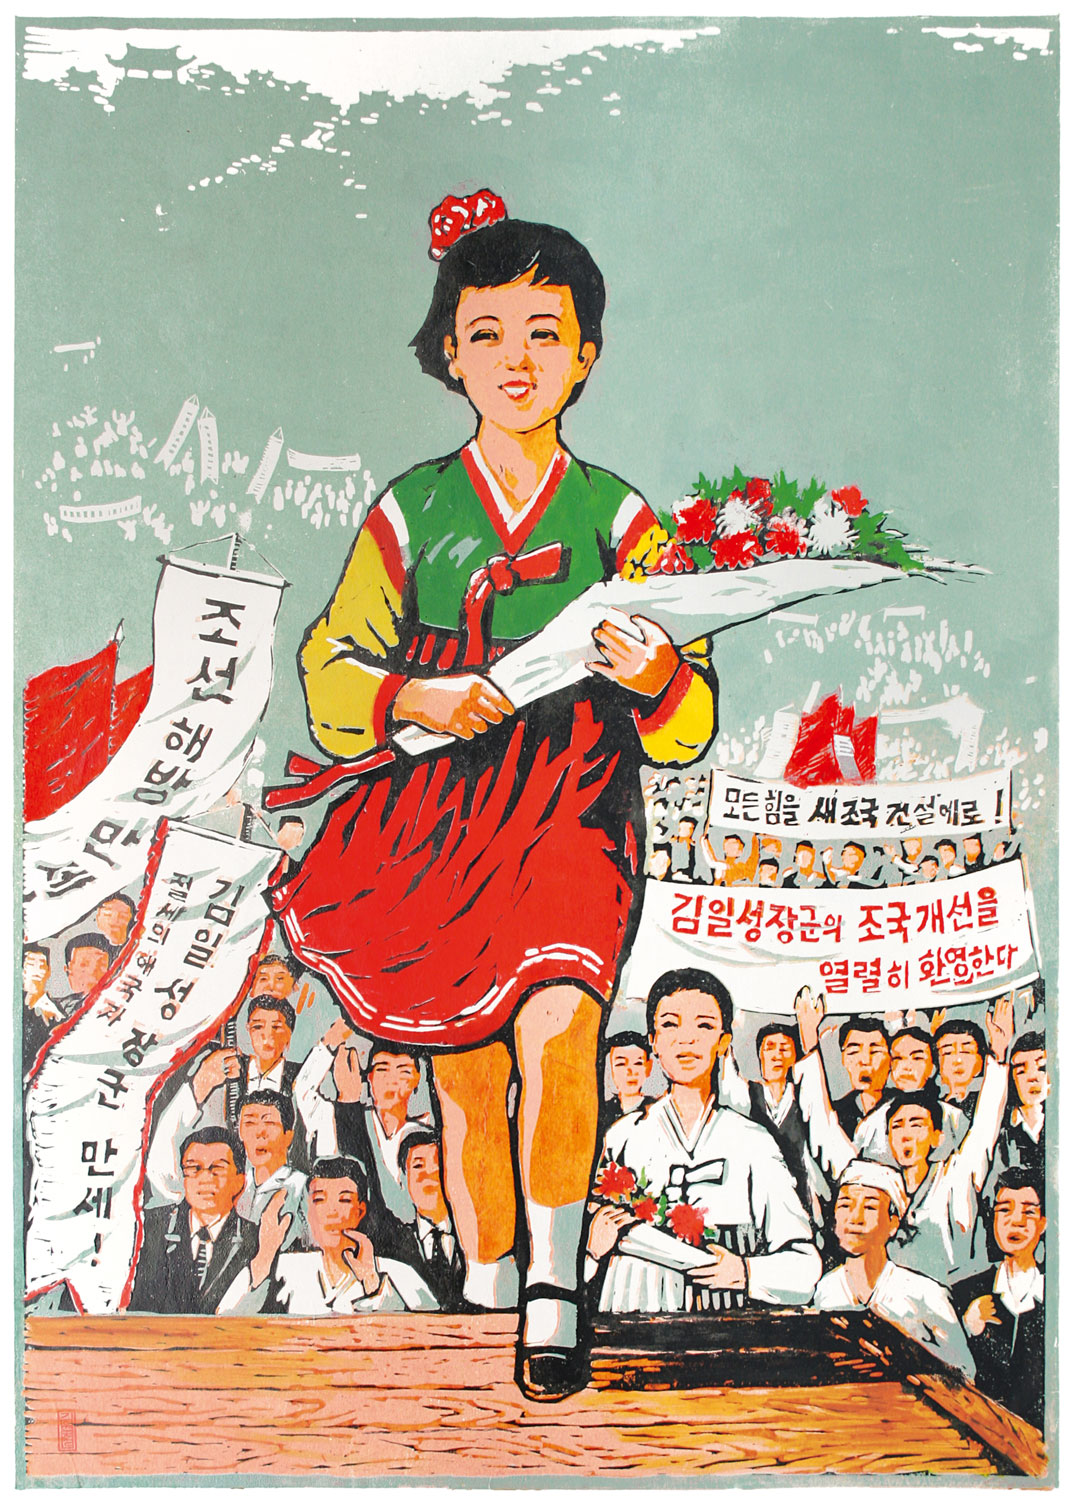 First Flower of the Triumphant Return by Kim Won Chol, 2003. All images from Printed in North Korea